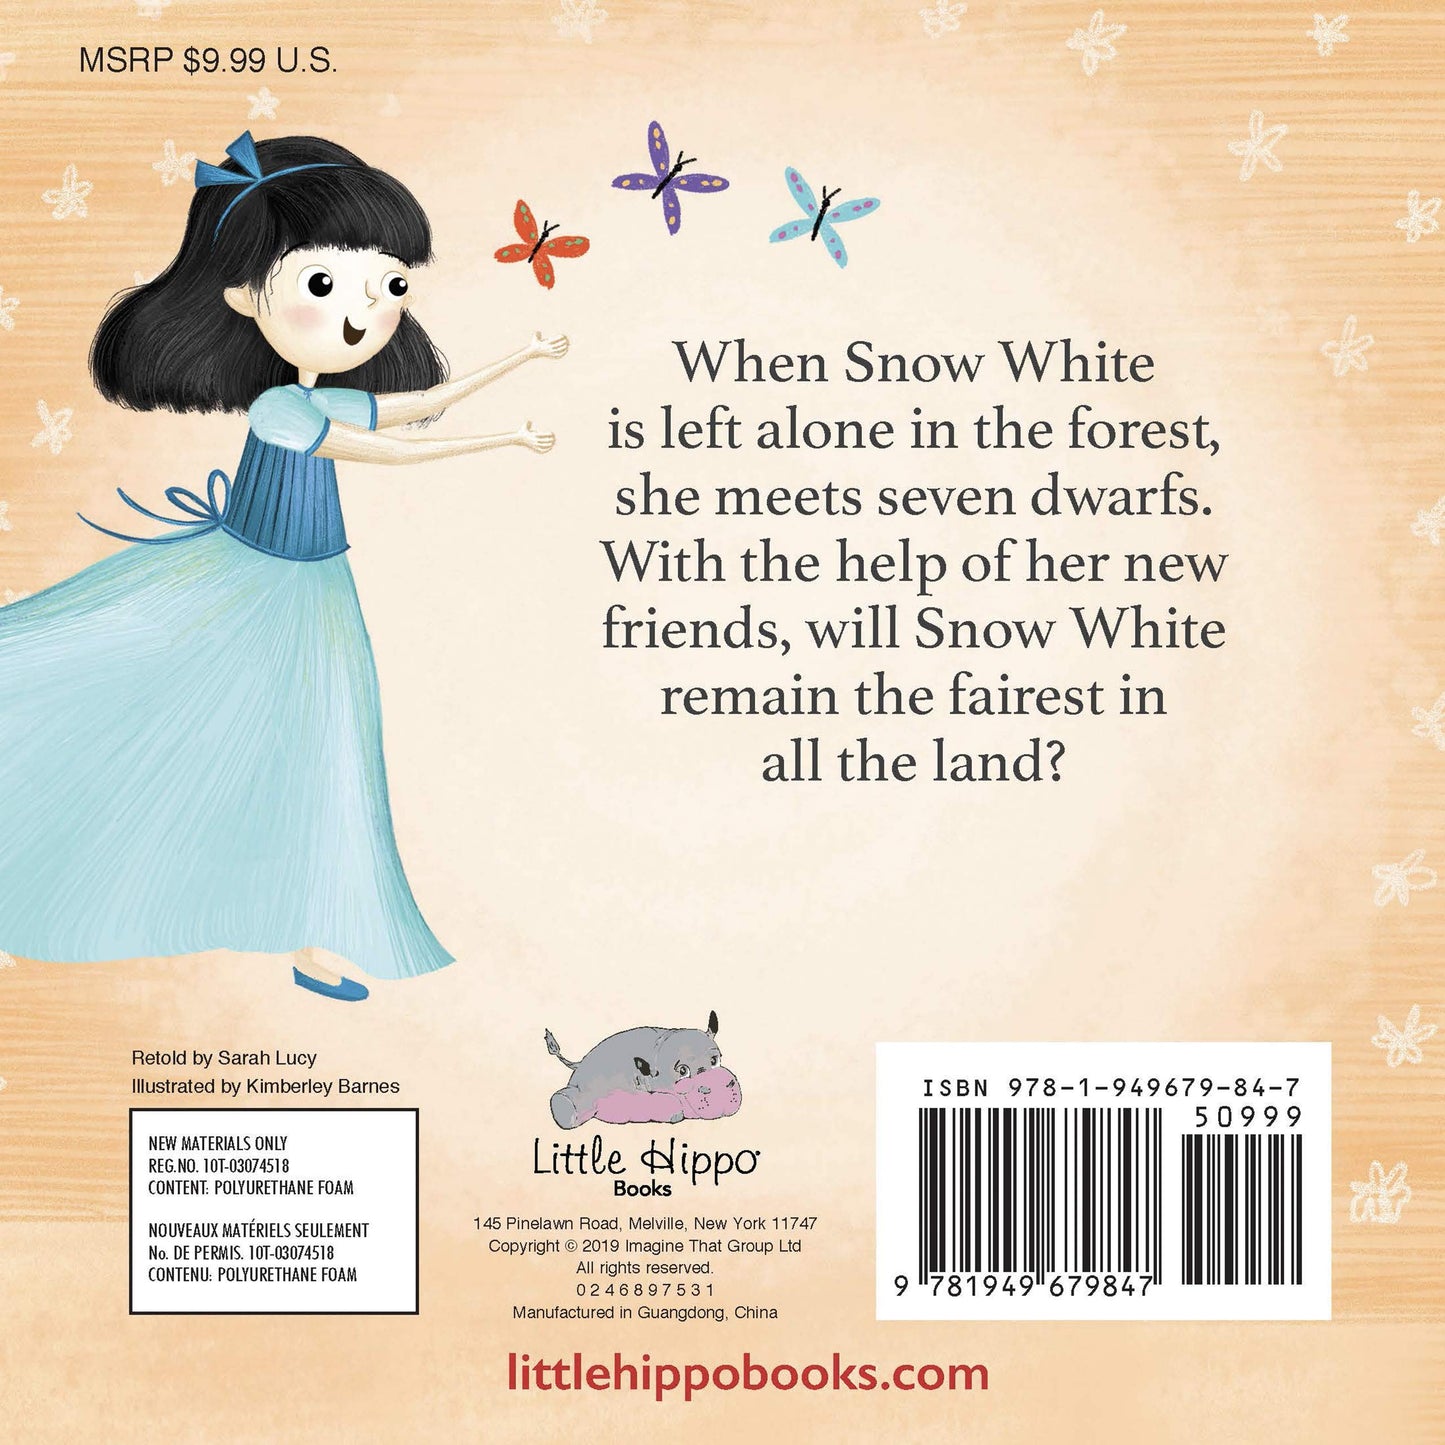 Snow White - The Brothers Grimm retold by Sarah Lucy